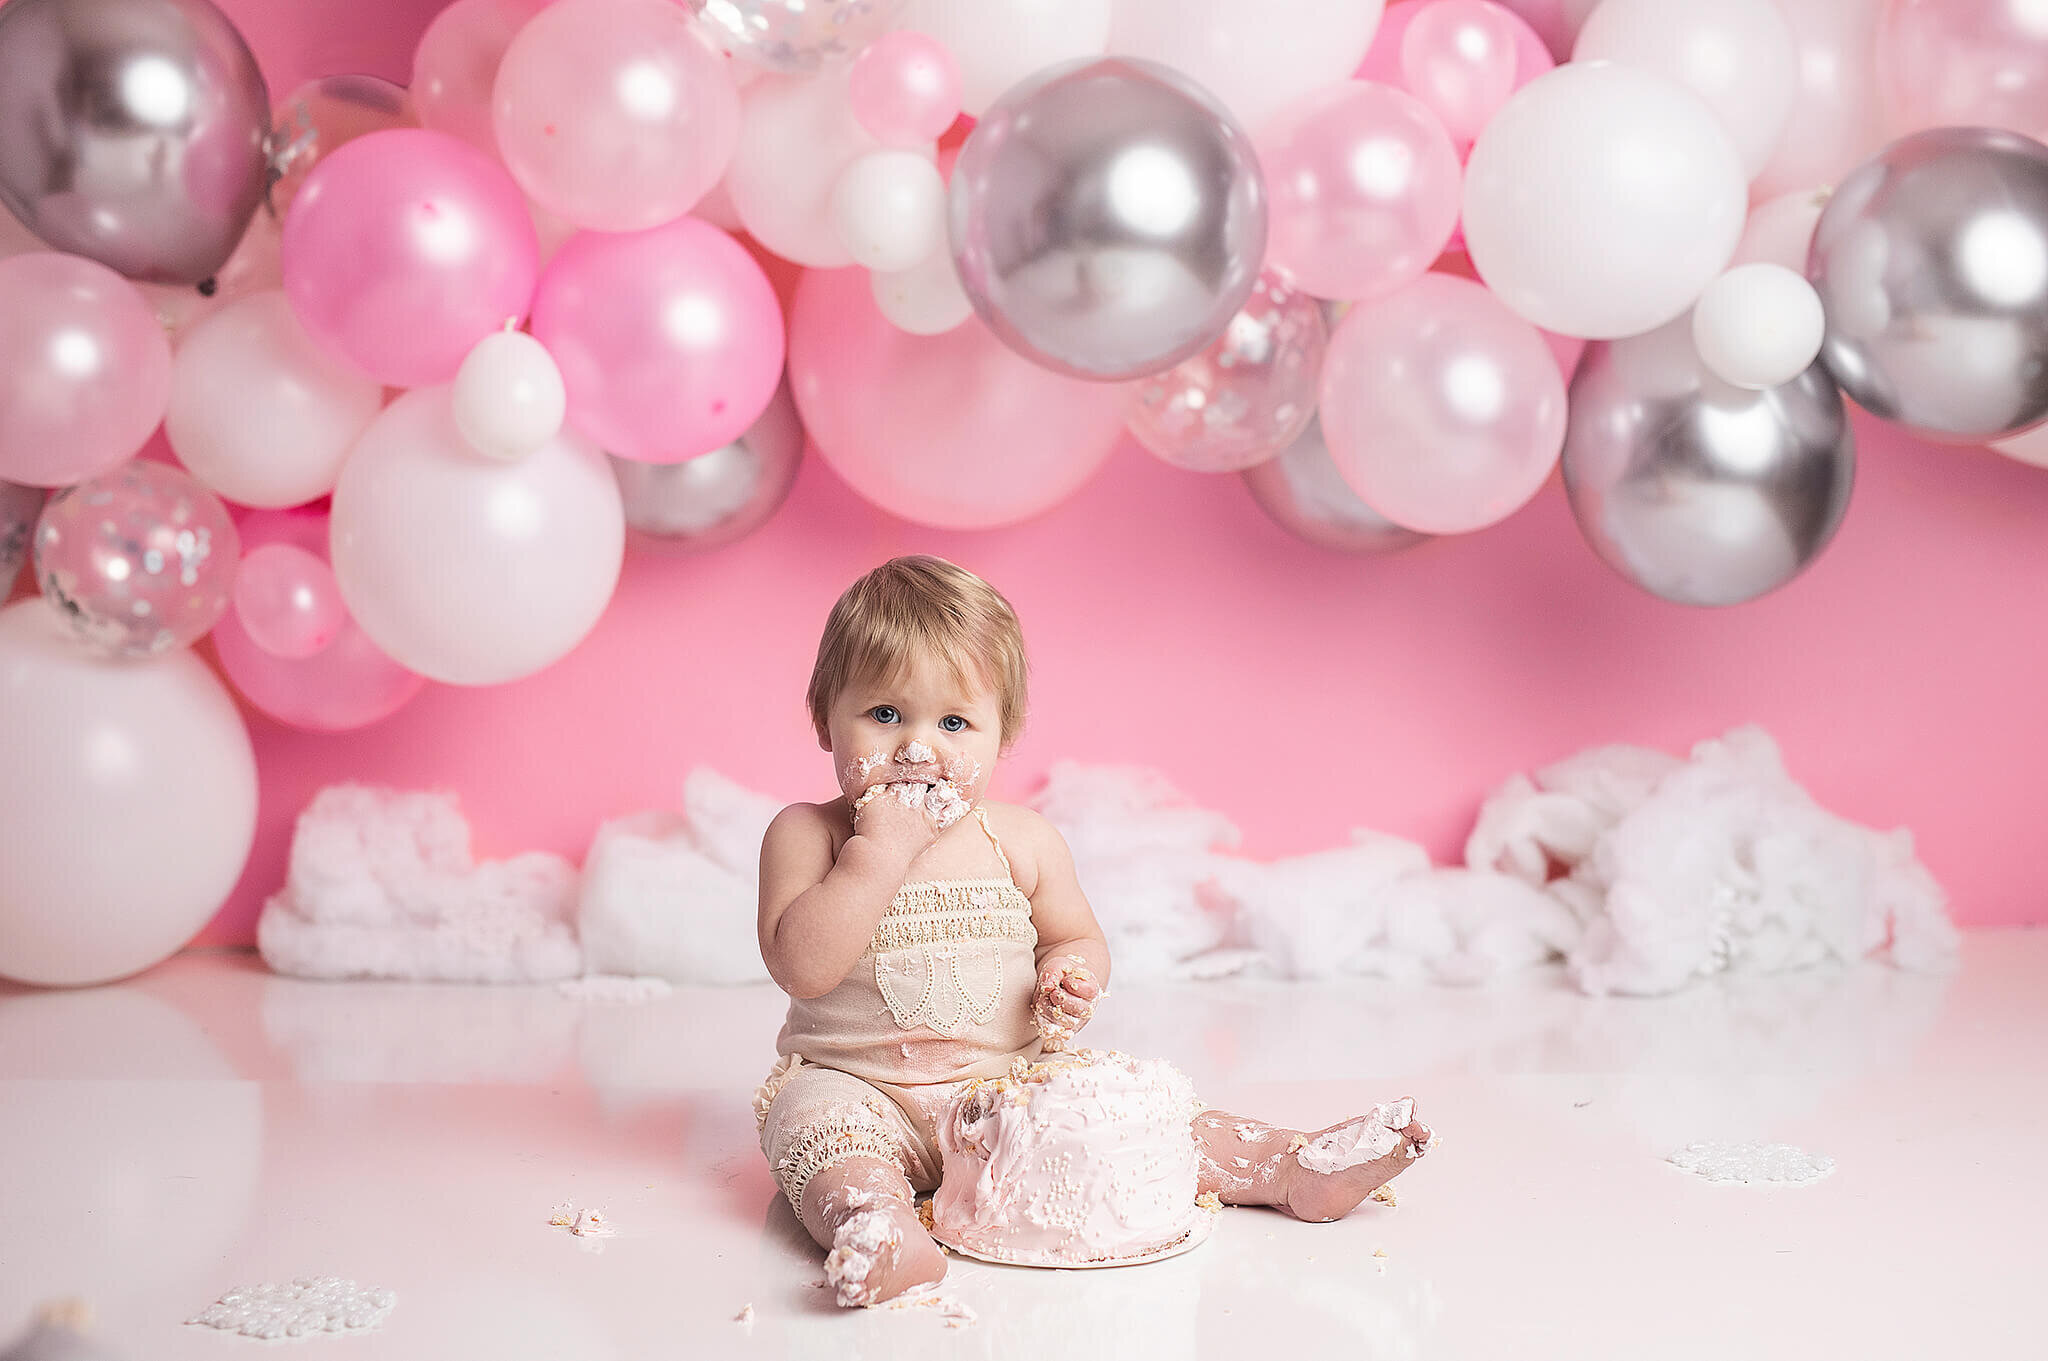 one year old cake smash, with pink background and white, pink and silver balloon arch